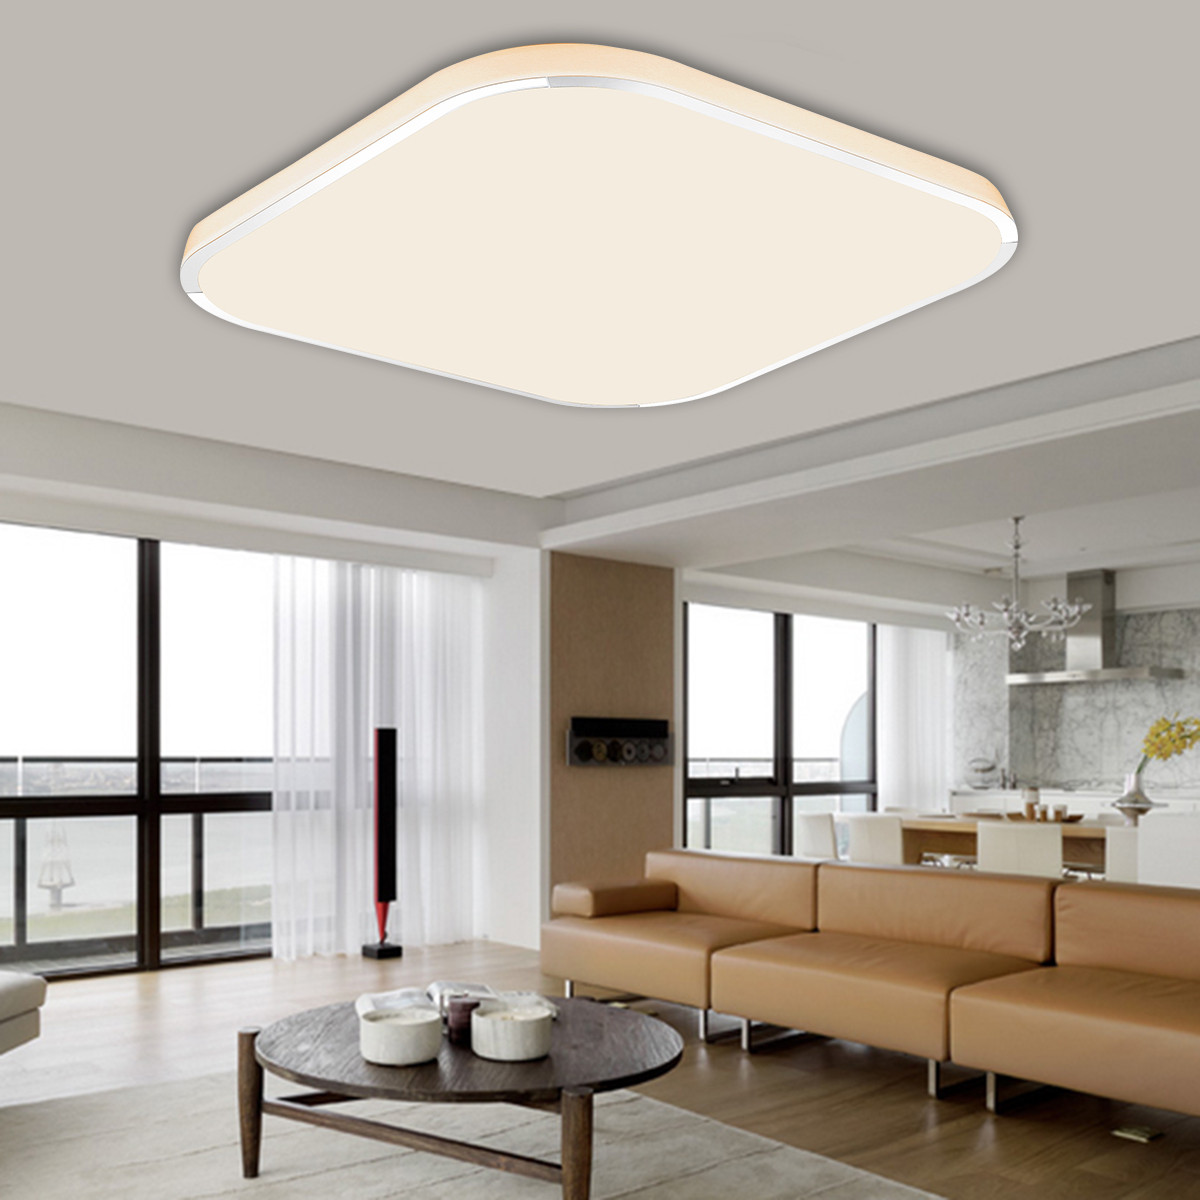 Led Kitchen Ceiling Lights
 36W Dimmable LED Ceiling Down Light Bathroom Fitting